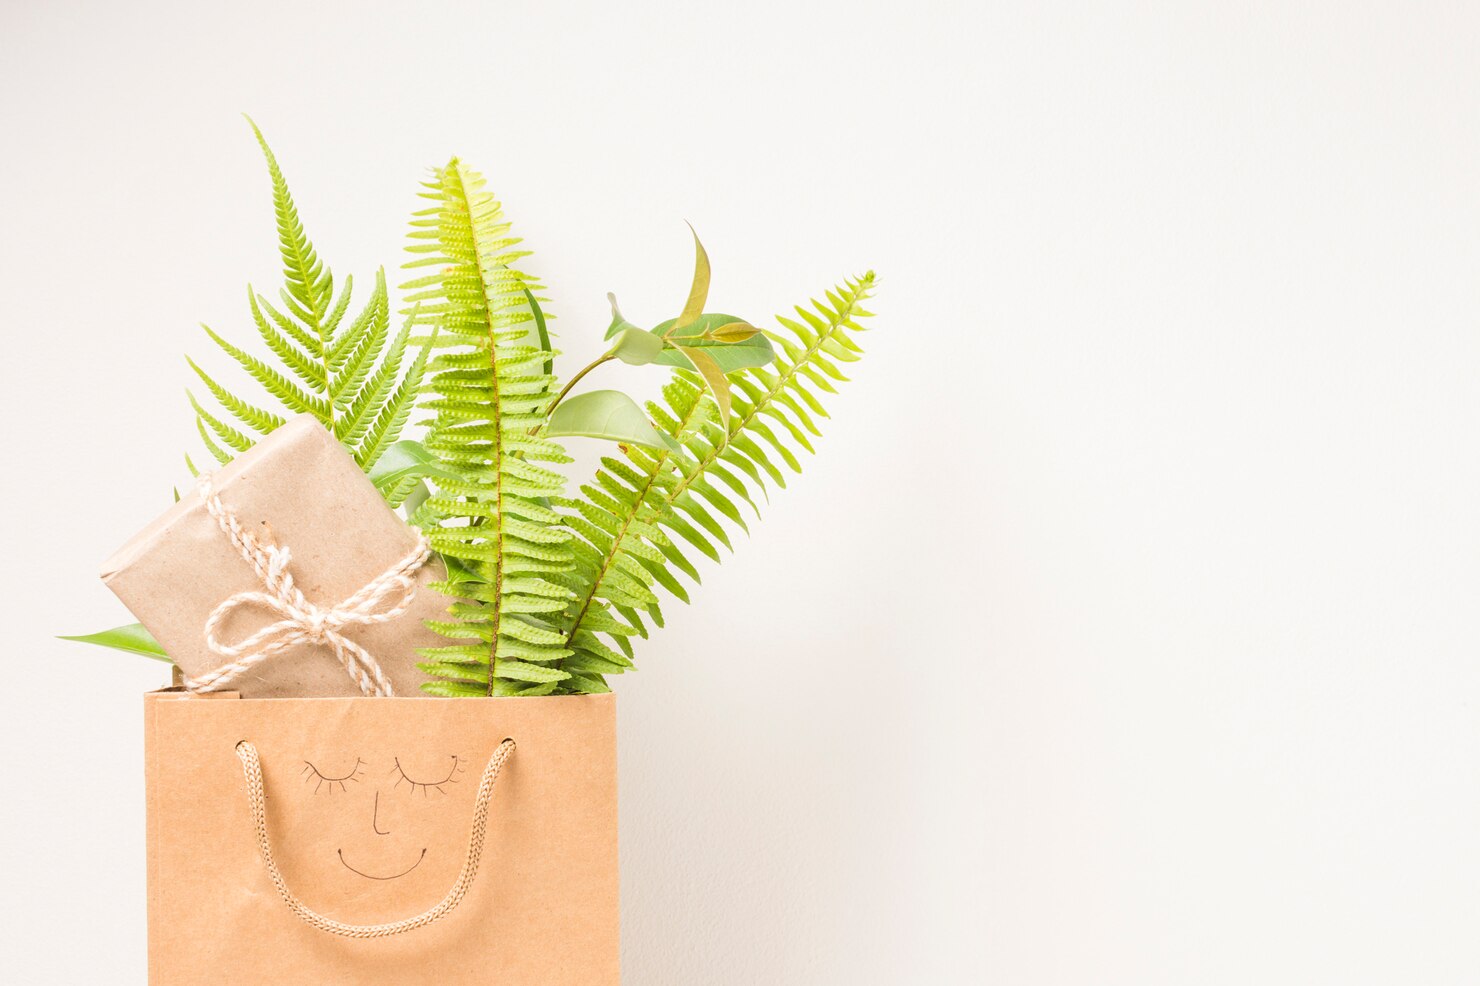 brown paper bag with fern leaves gift box against white backdrop